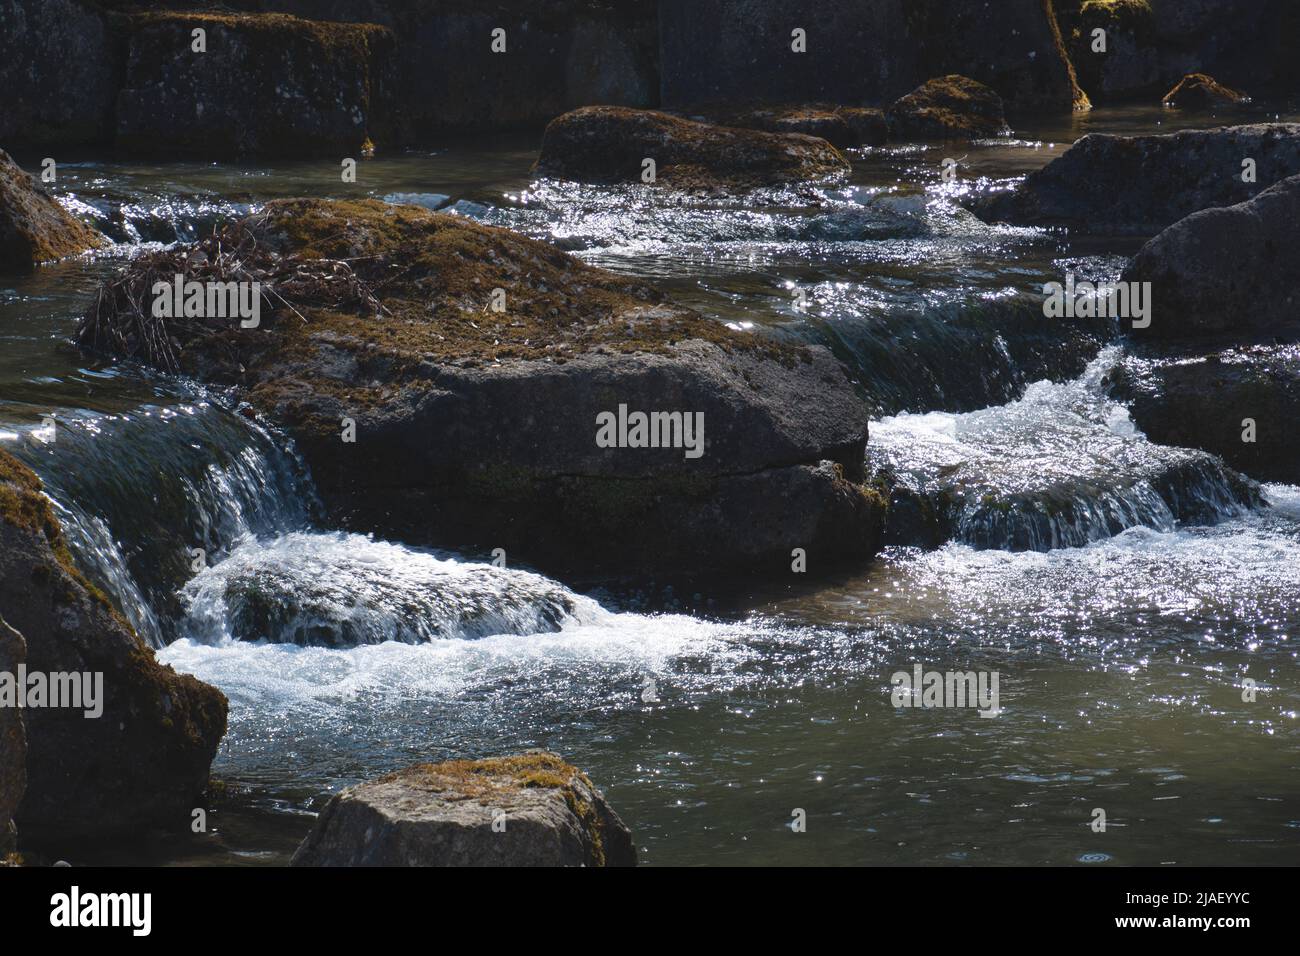 artificially created small stream with waterfall with big boulder Stock Photo